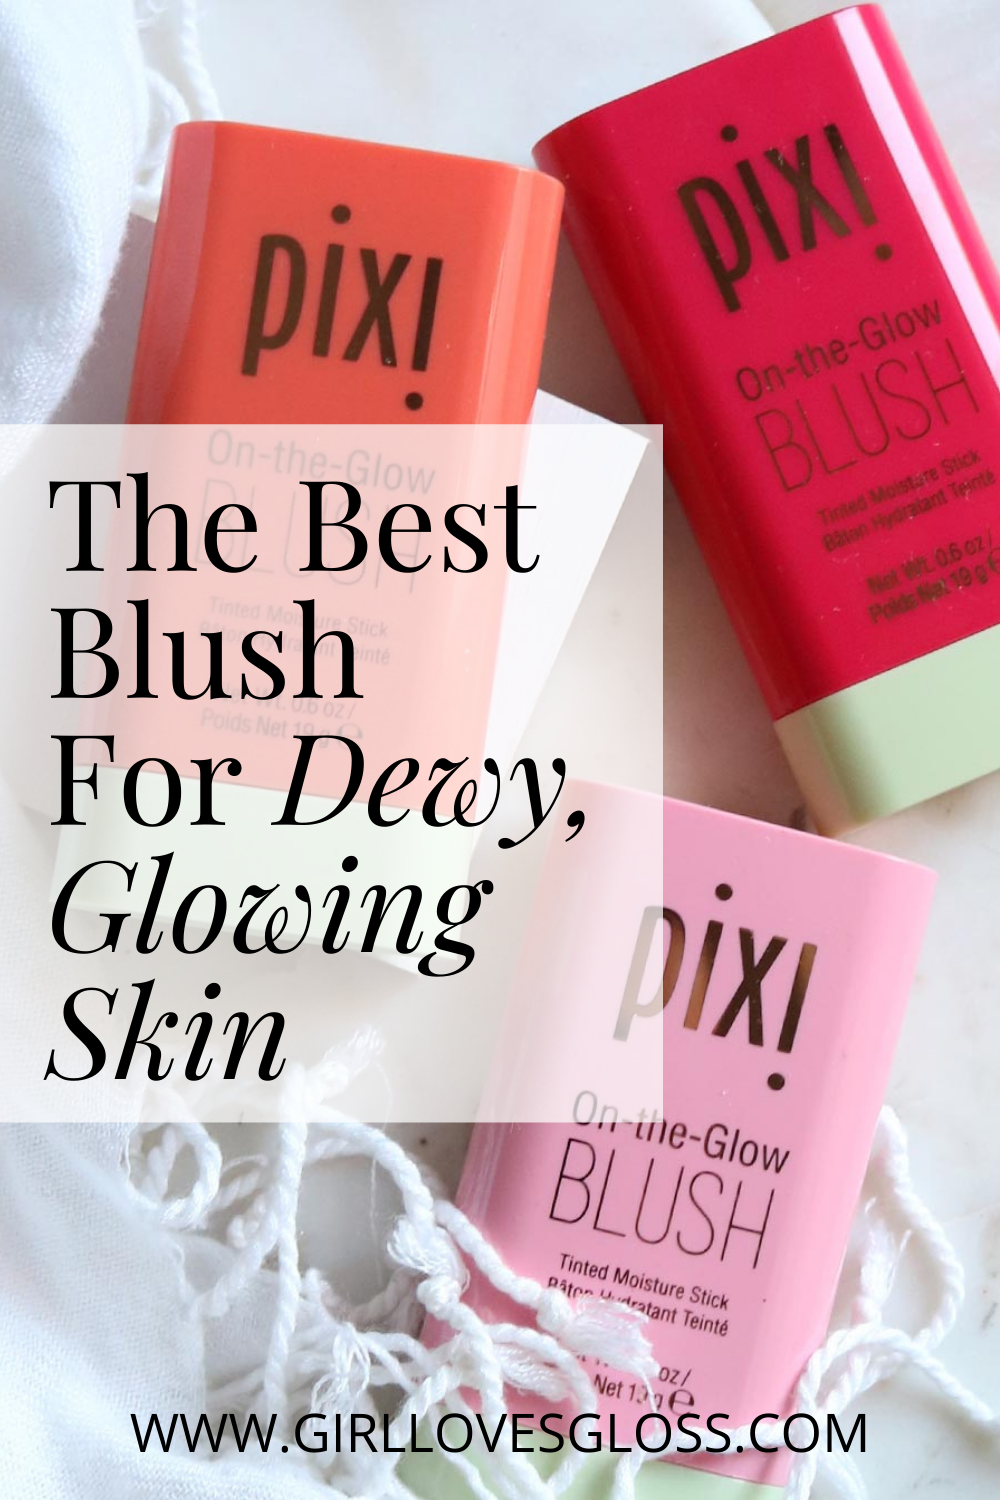 Pixi On the Glow Blush Tinted Moisture Stick swatches and reviews